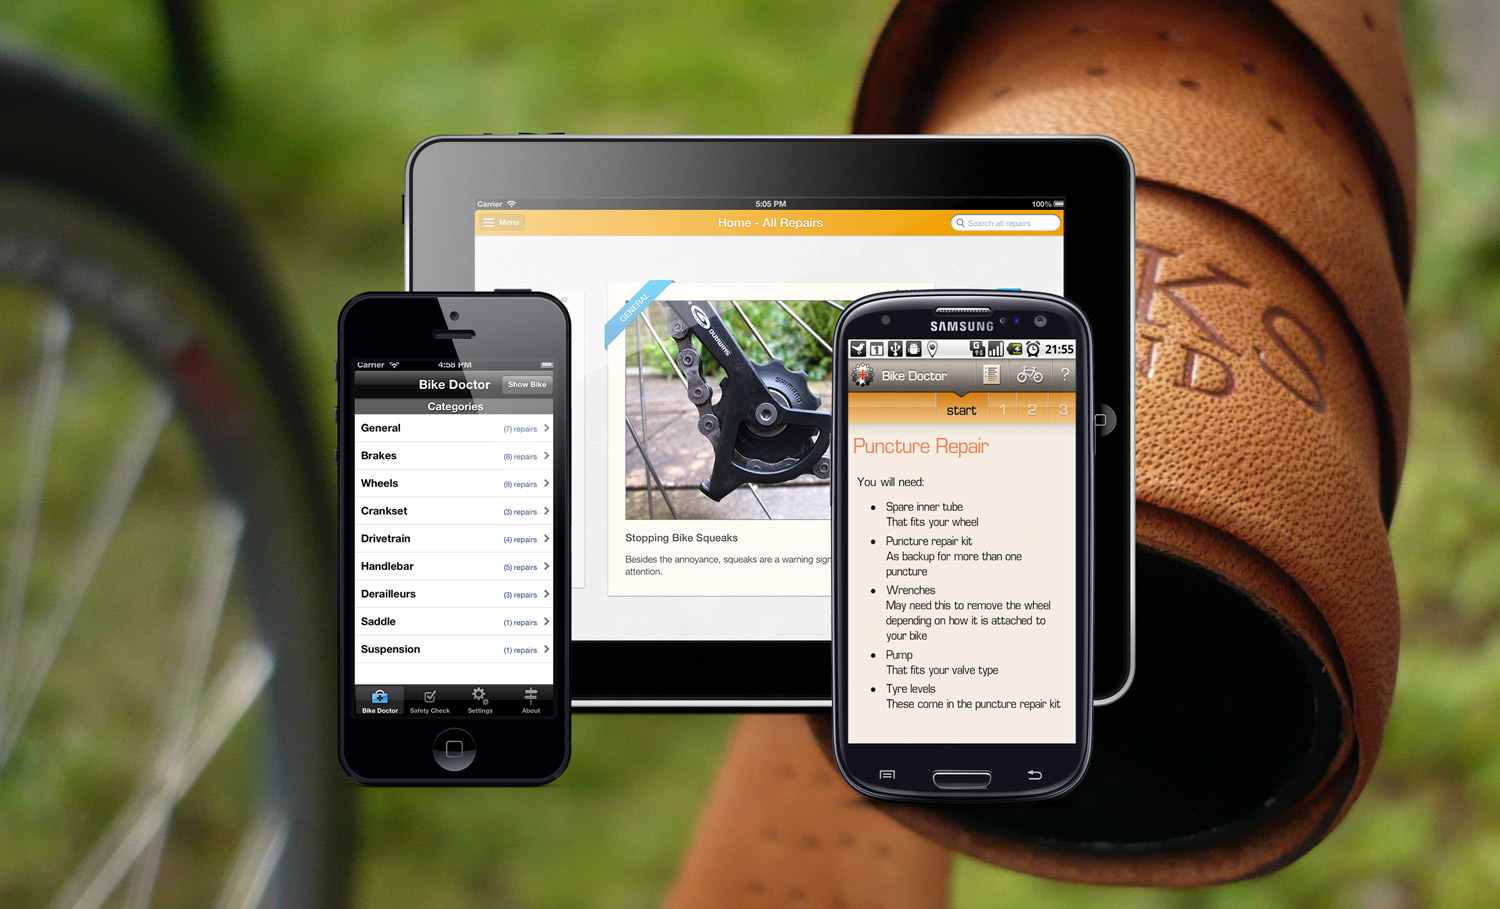 Bike Doctor on the iPhone, iPad and on Android devices